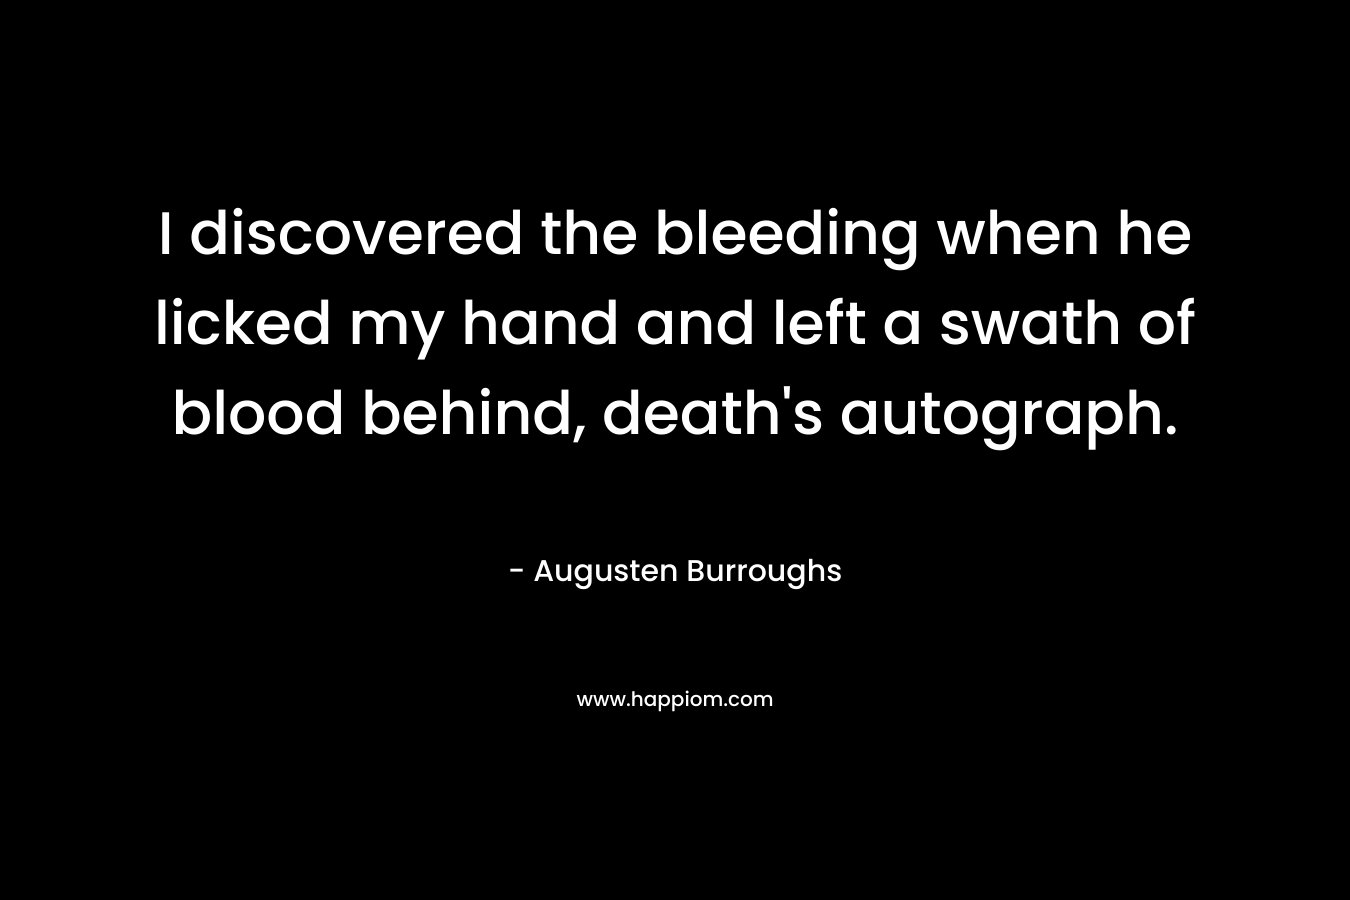 I discovered the bleeding when he licked my hand and left a swath of blood behind, death’s autograph. – Augusten Burroughs